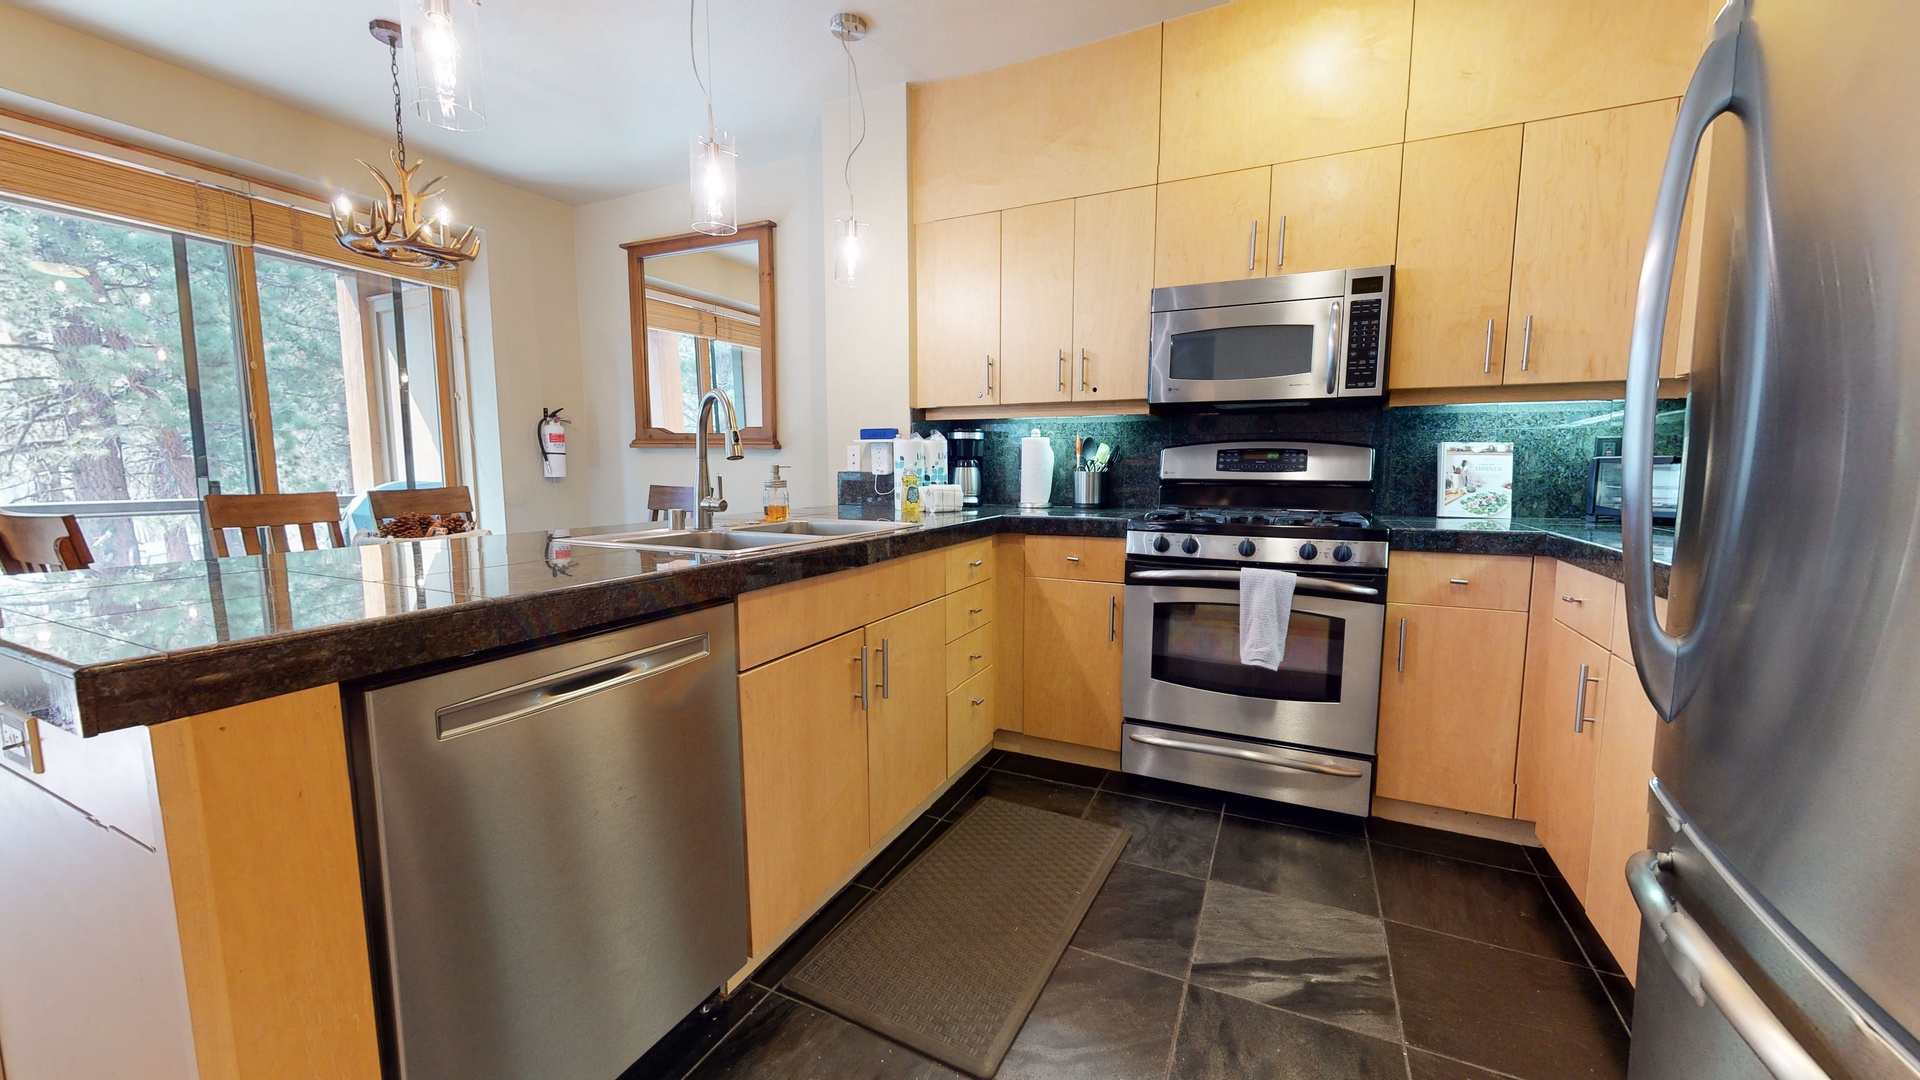 Kitchen with drip coffee maker, toaster oven, blender, and more